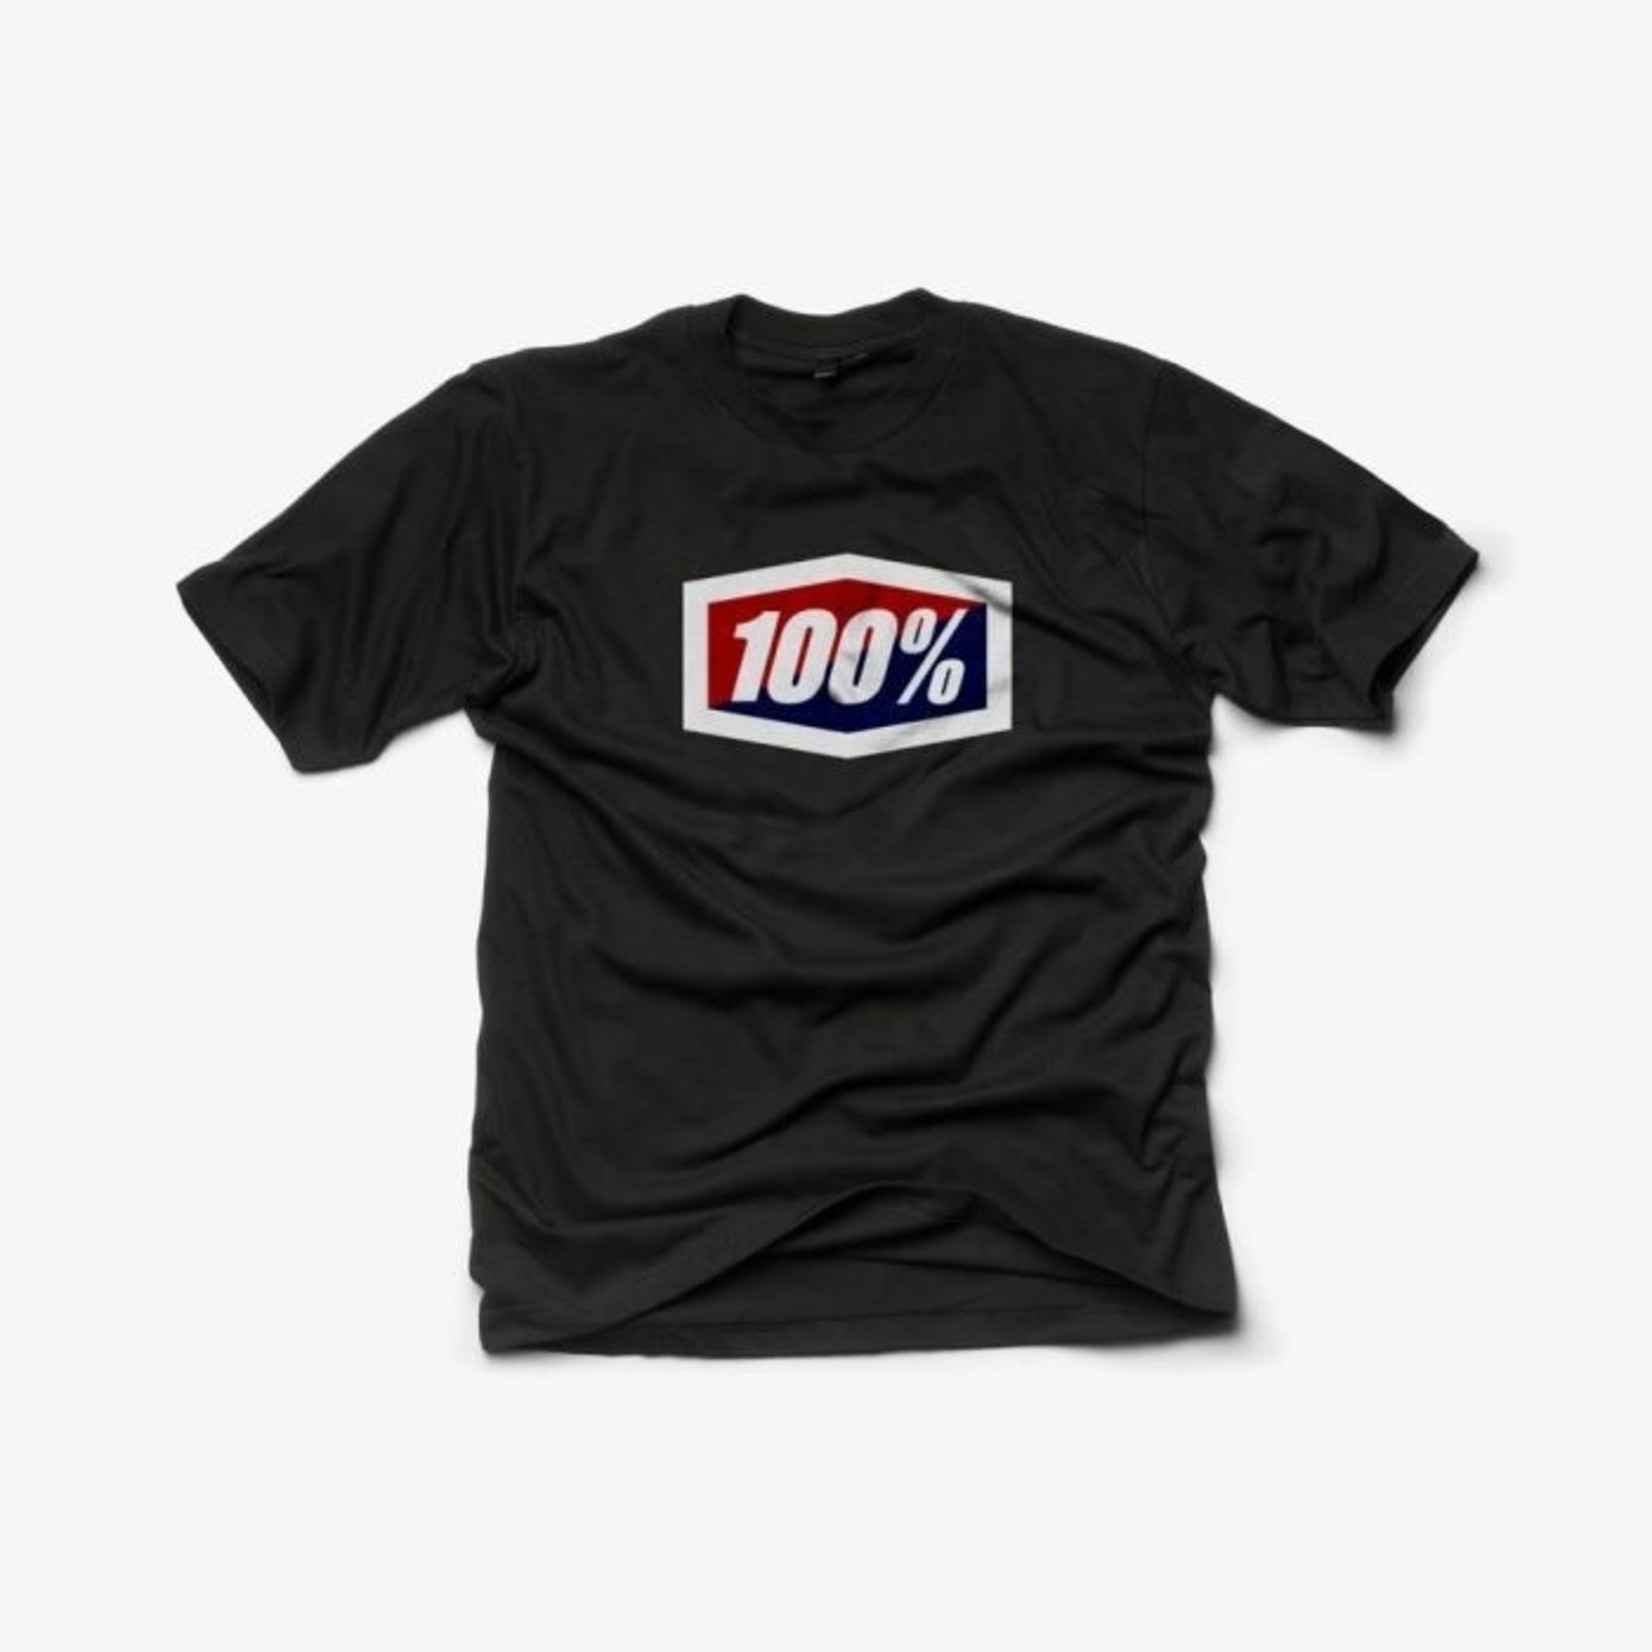 100 Percent 100% Official Bike/Cycling 100% Comfort And Style T-Shirt - Black - Large